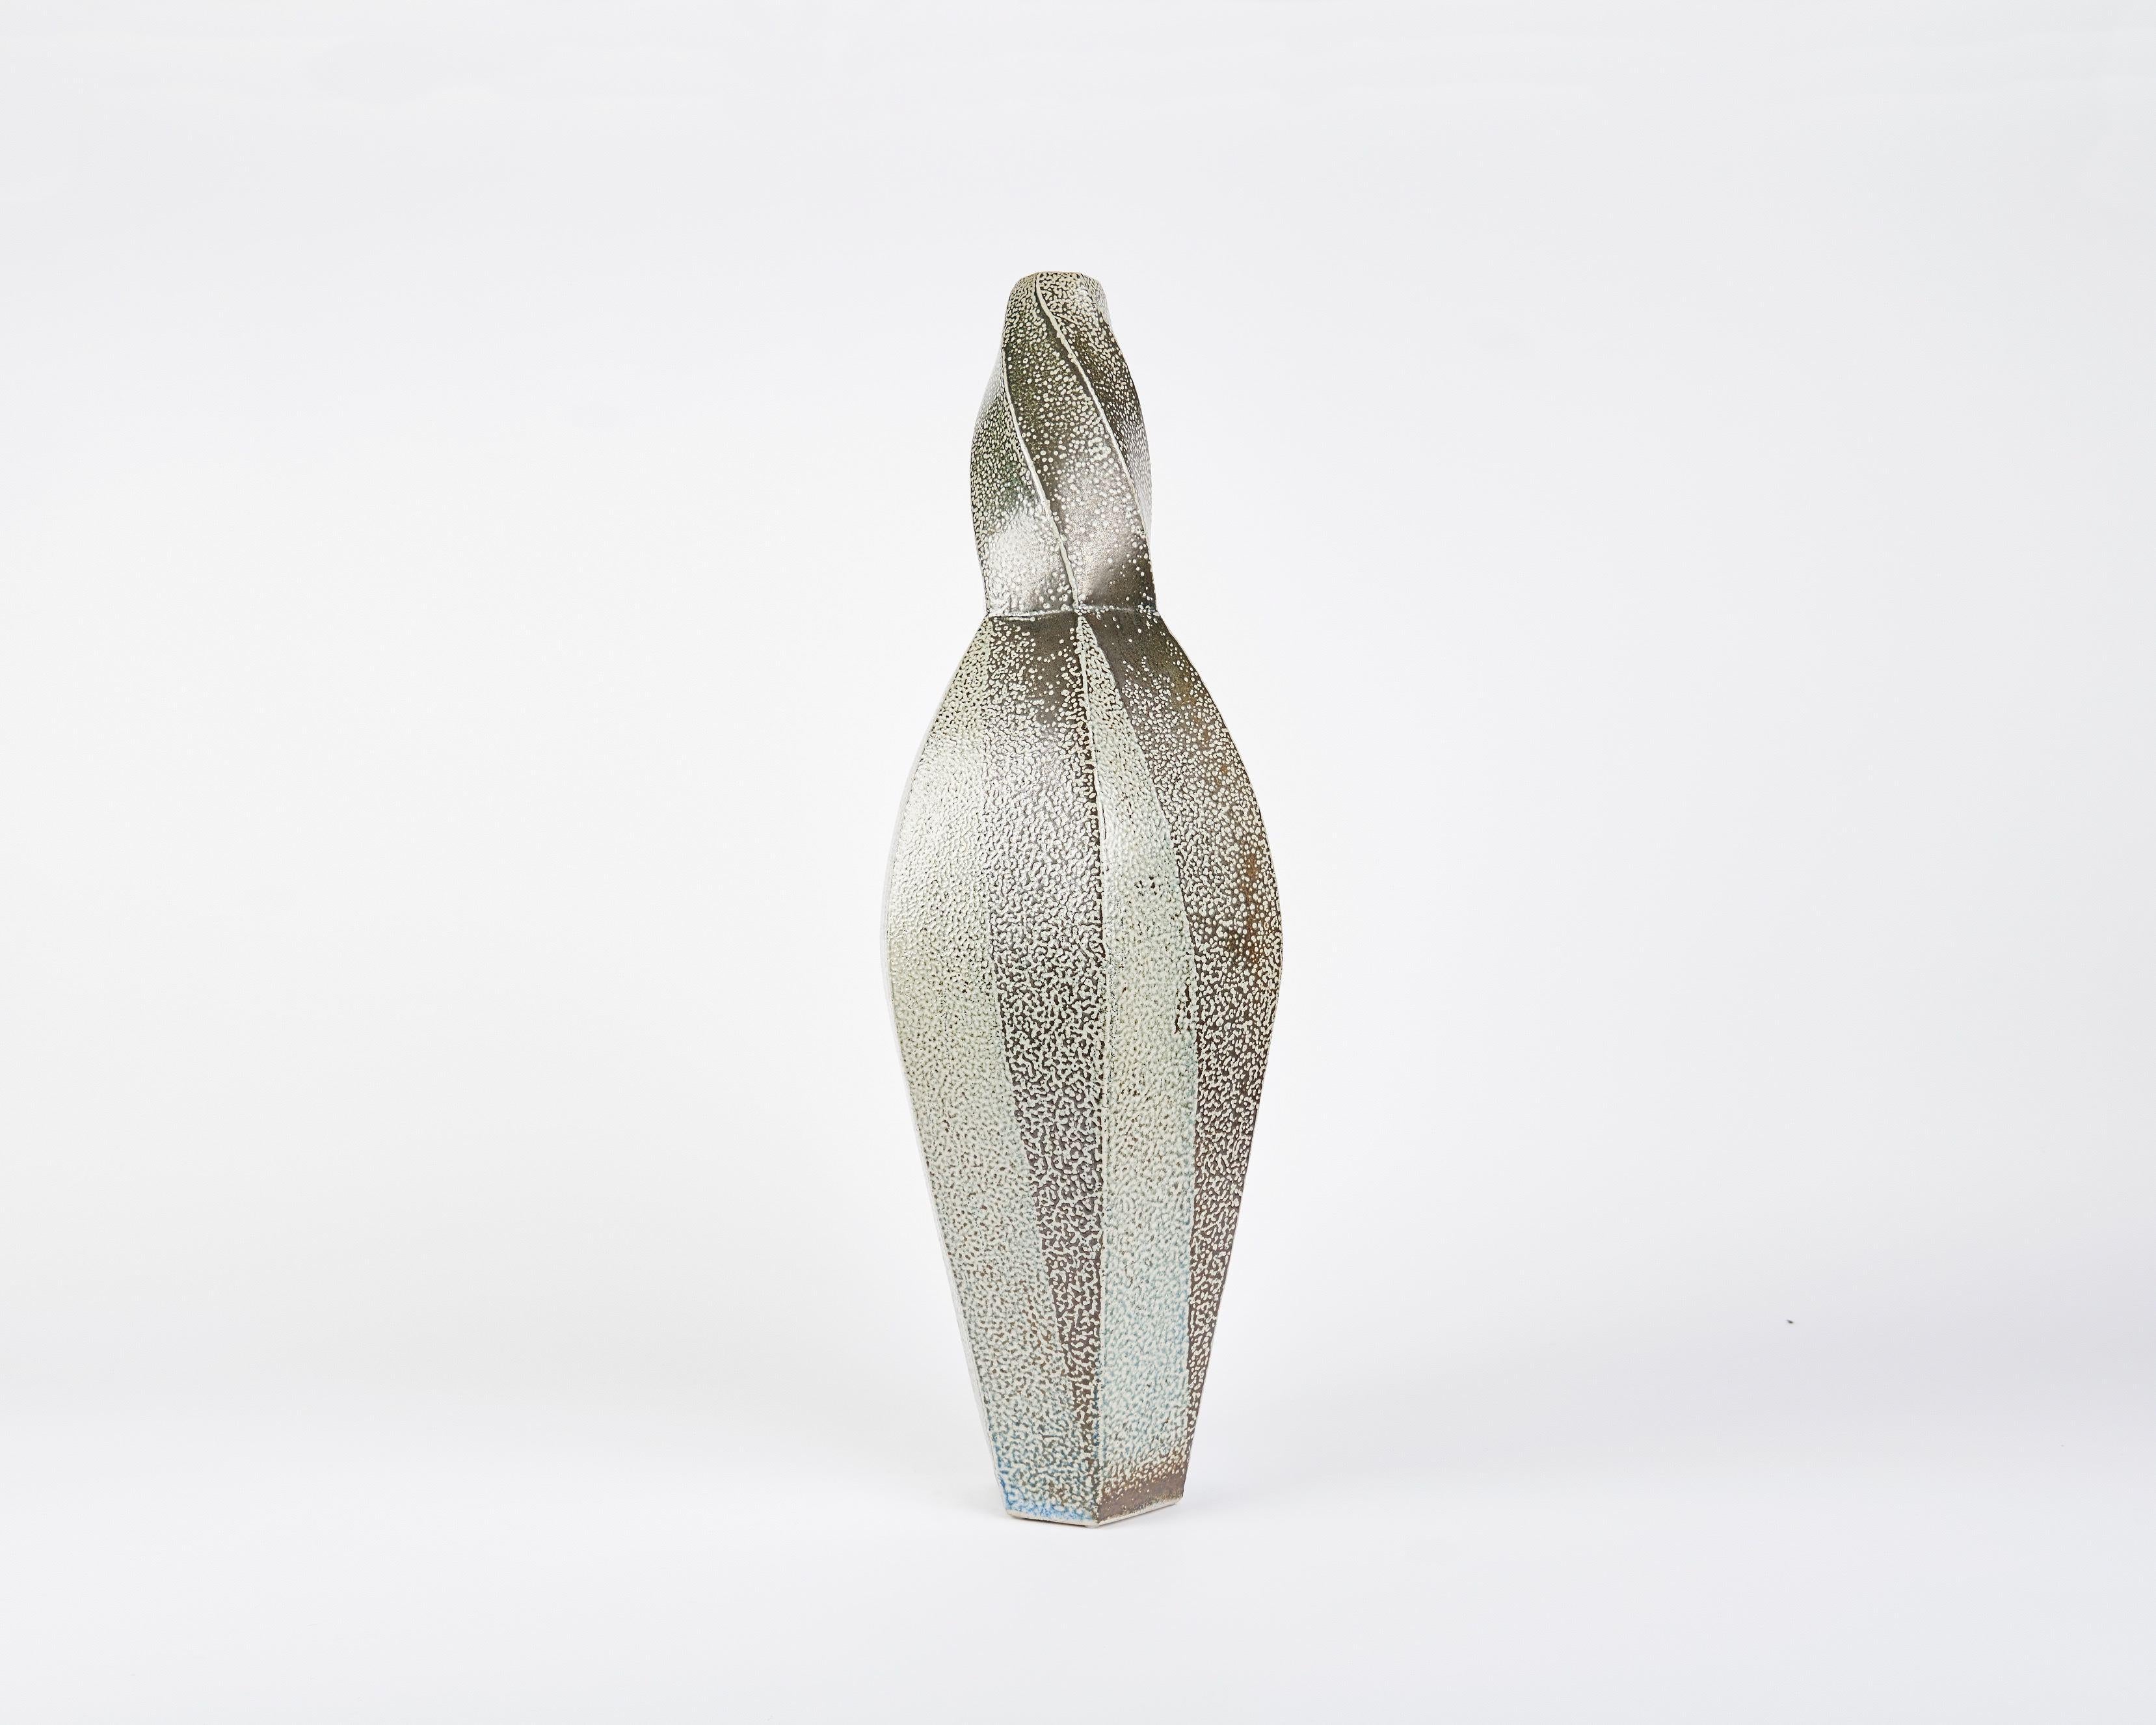 This twisted, faceted vase by contemporary Danish ceramicist Aage Birck, possesses a rigidity and texture unique for the medium.